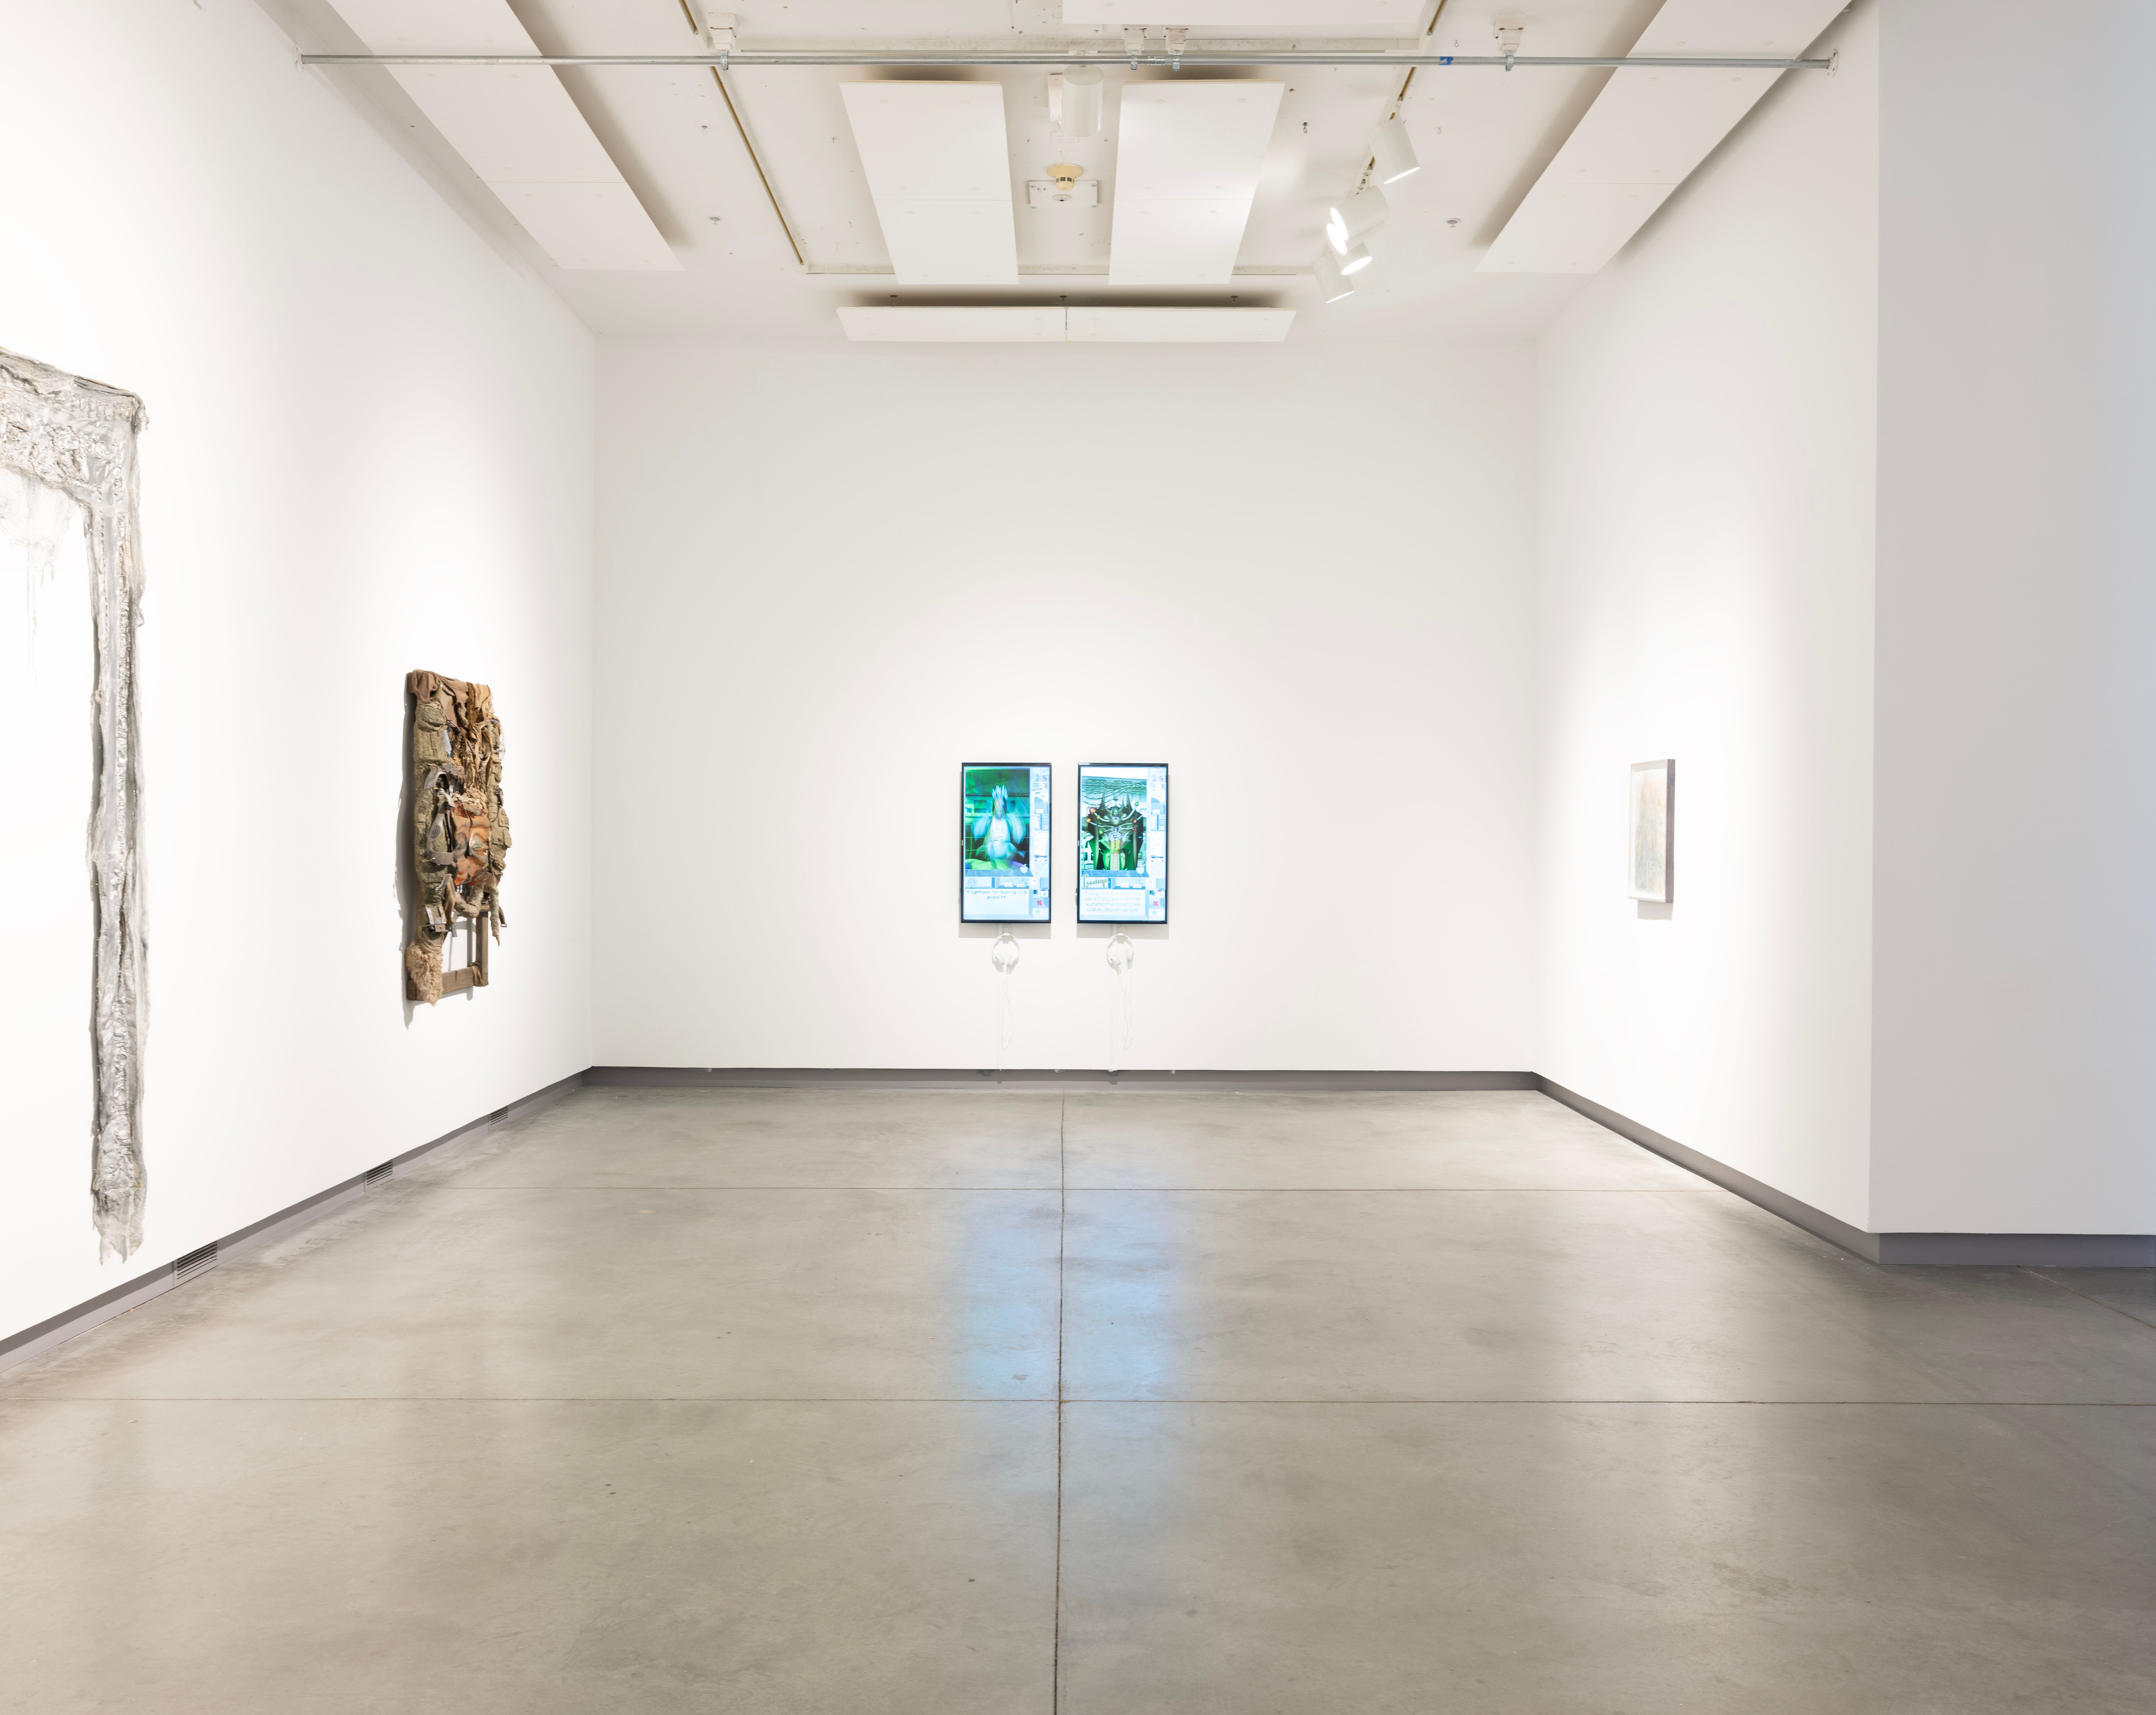 ENTER: installation view of two screens, two sculptures hanging on the wall, and a framed piece.